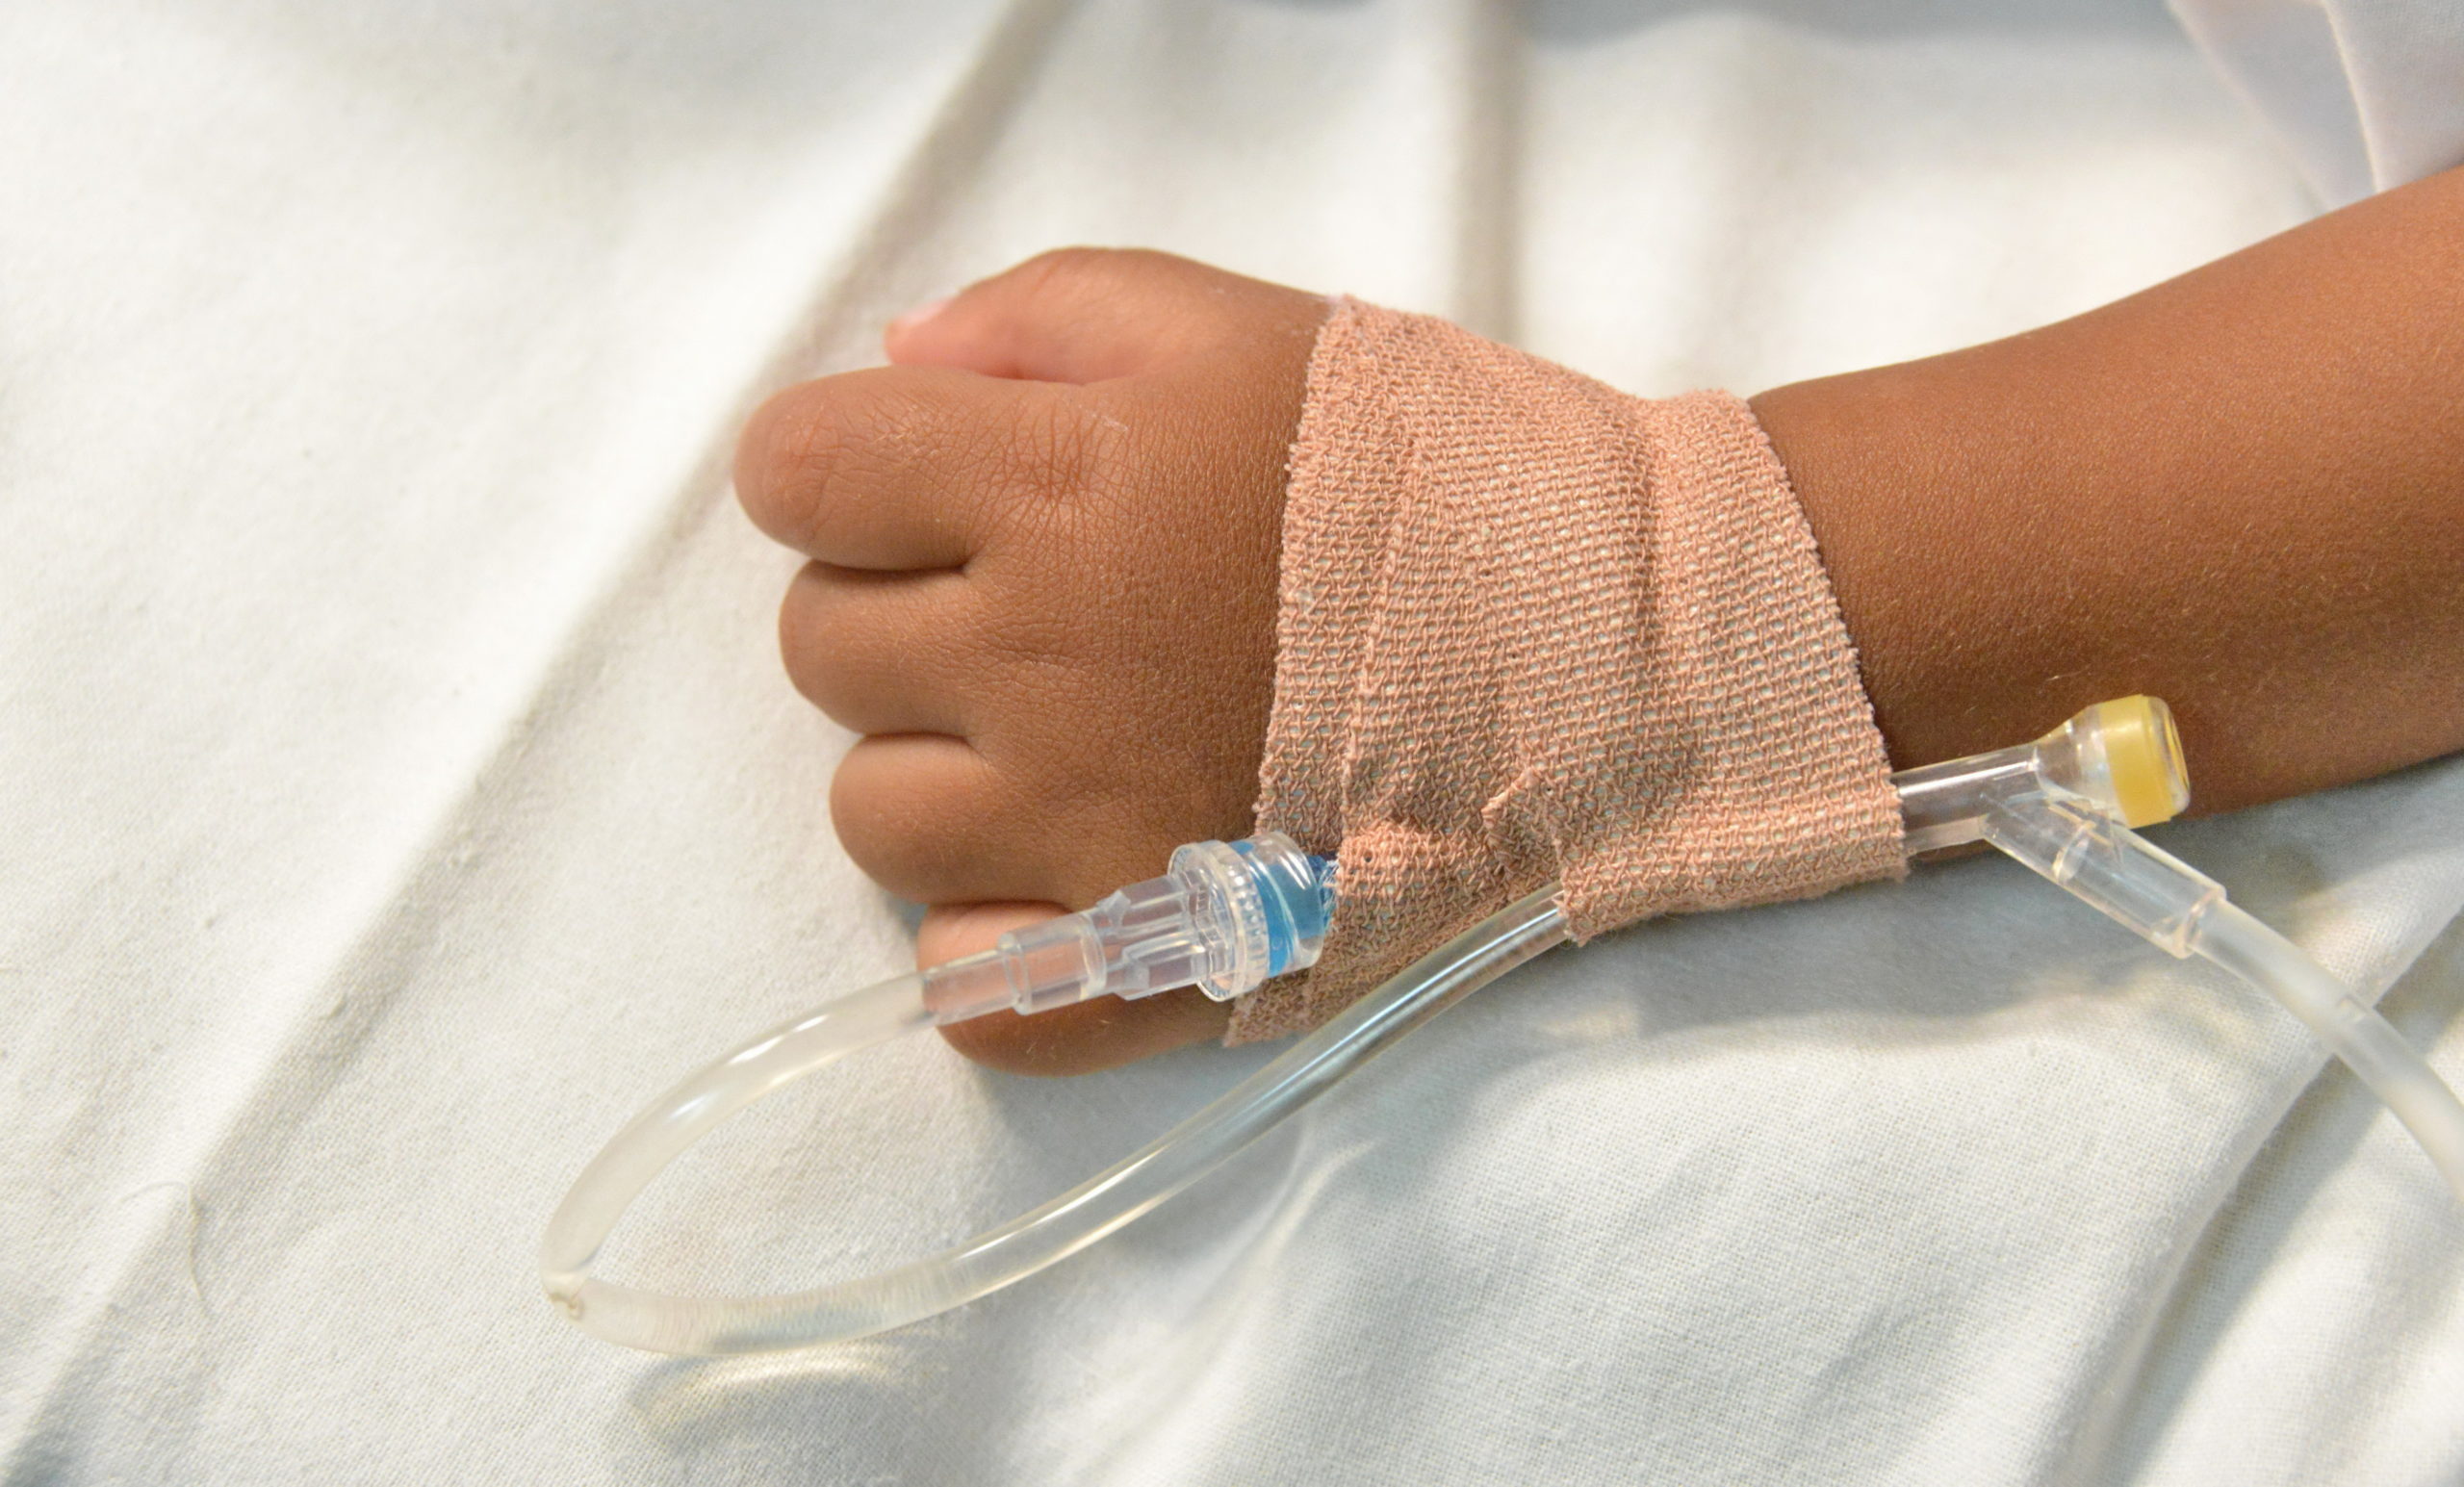 When an infant needs a blood transfusion